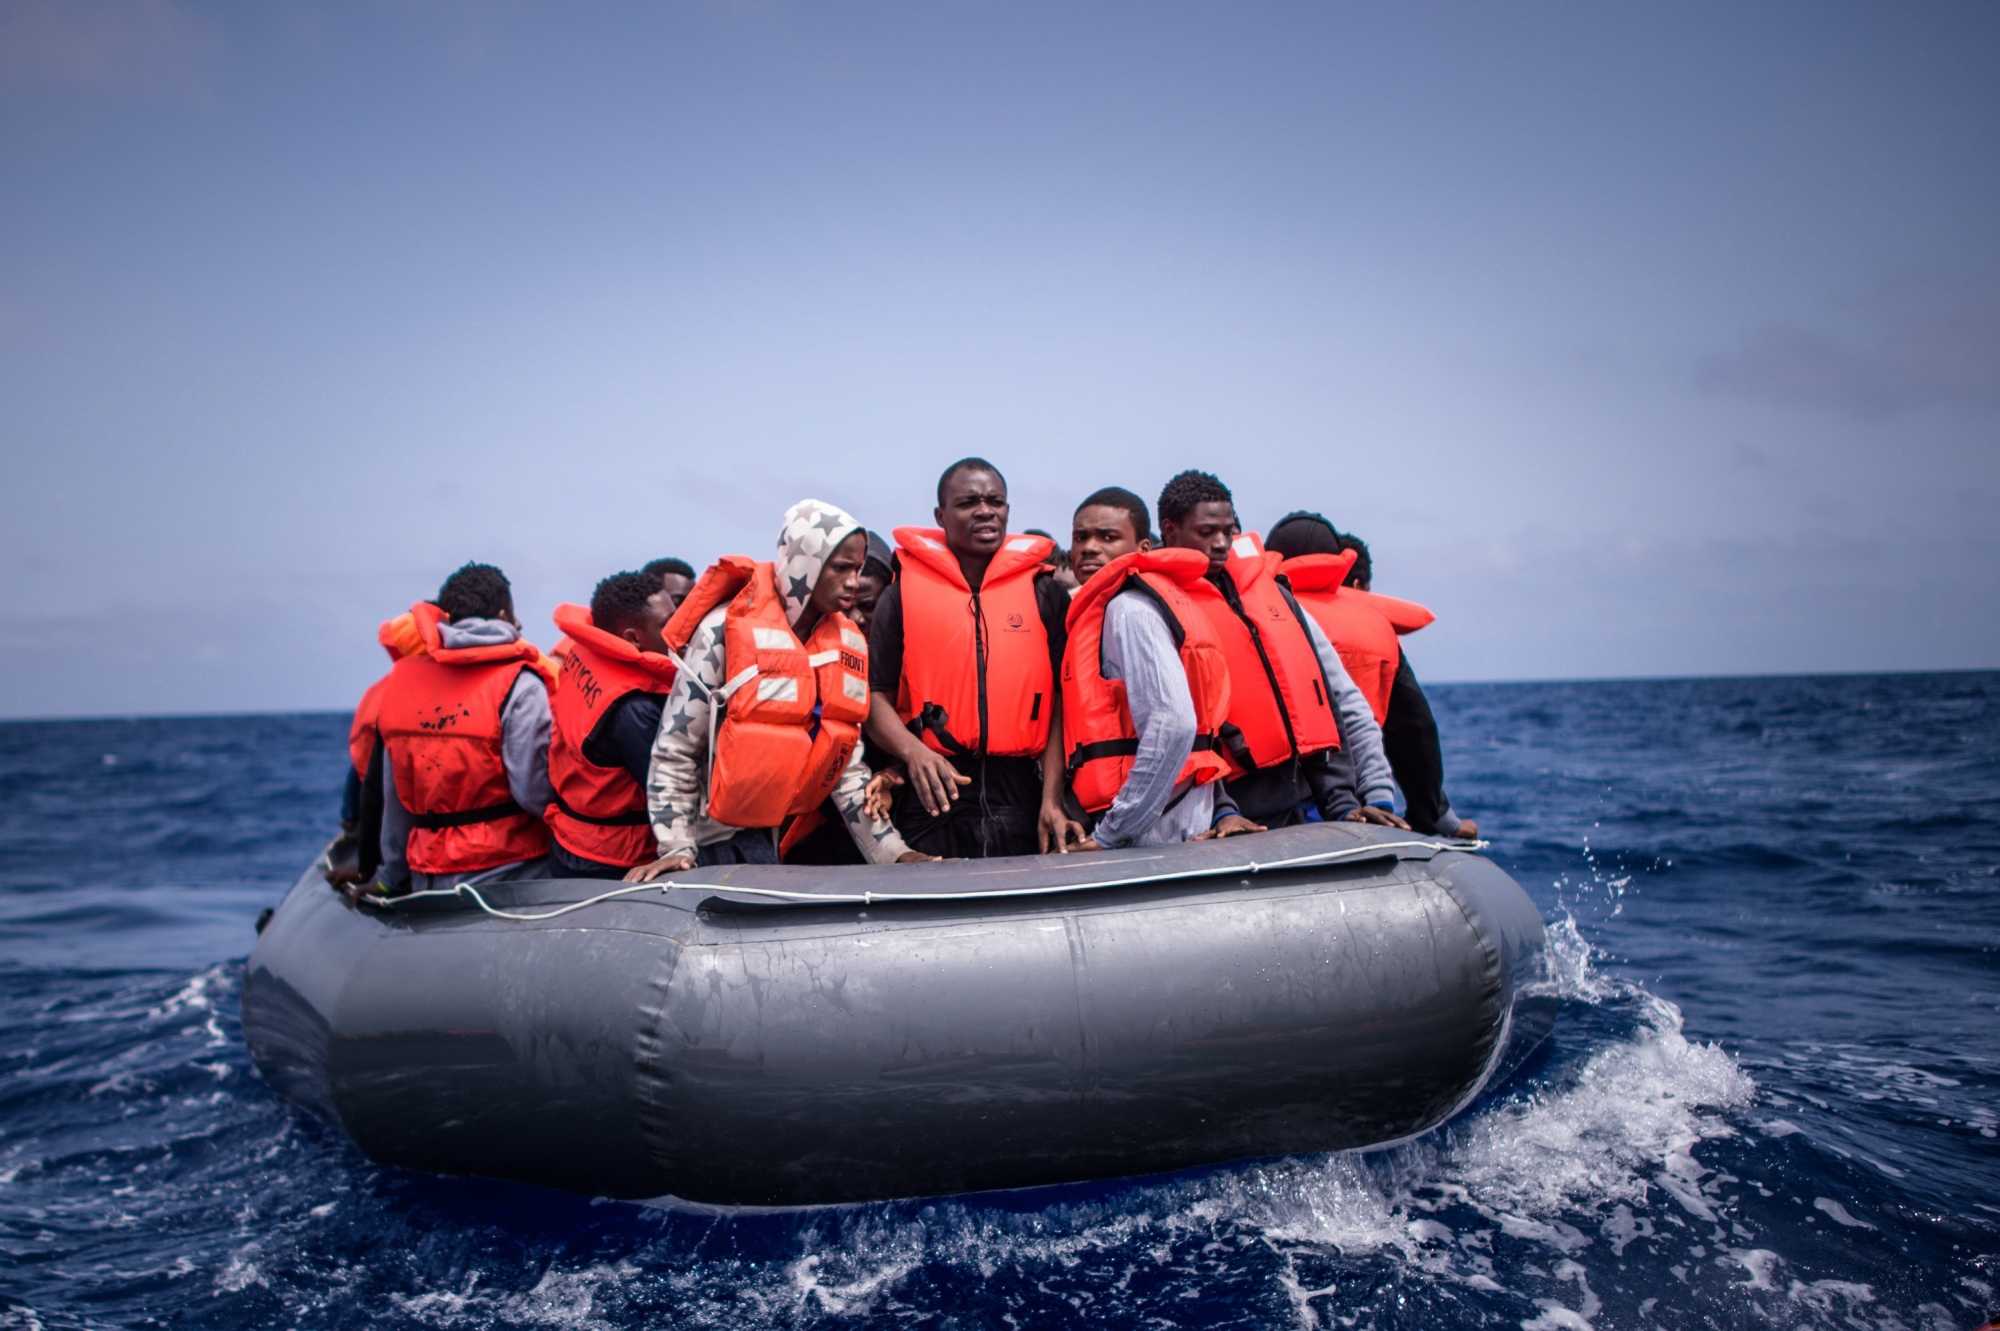 epa06677195 Refugees on a rubber dinghy are rescued by members of the NGO 'SOS Mediterranee' from the 'Aquarius' vessel during an operation to rescue migrants, about 50 kilometers off the Libyan coast, in the Mediterranean Sea, 18 April 2018. Approximatly 100 people, mostly from western Africa, were rescue by the Aquarius crew after leaving the Libyan coast 10 hours before.  EPA/CHRISTOPHE PETIT TESSON AT SEA MIGRATION RESCUE